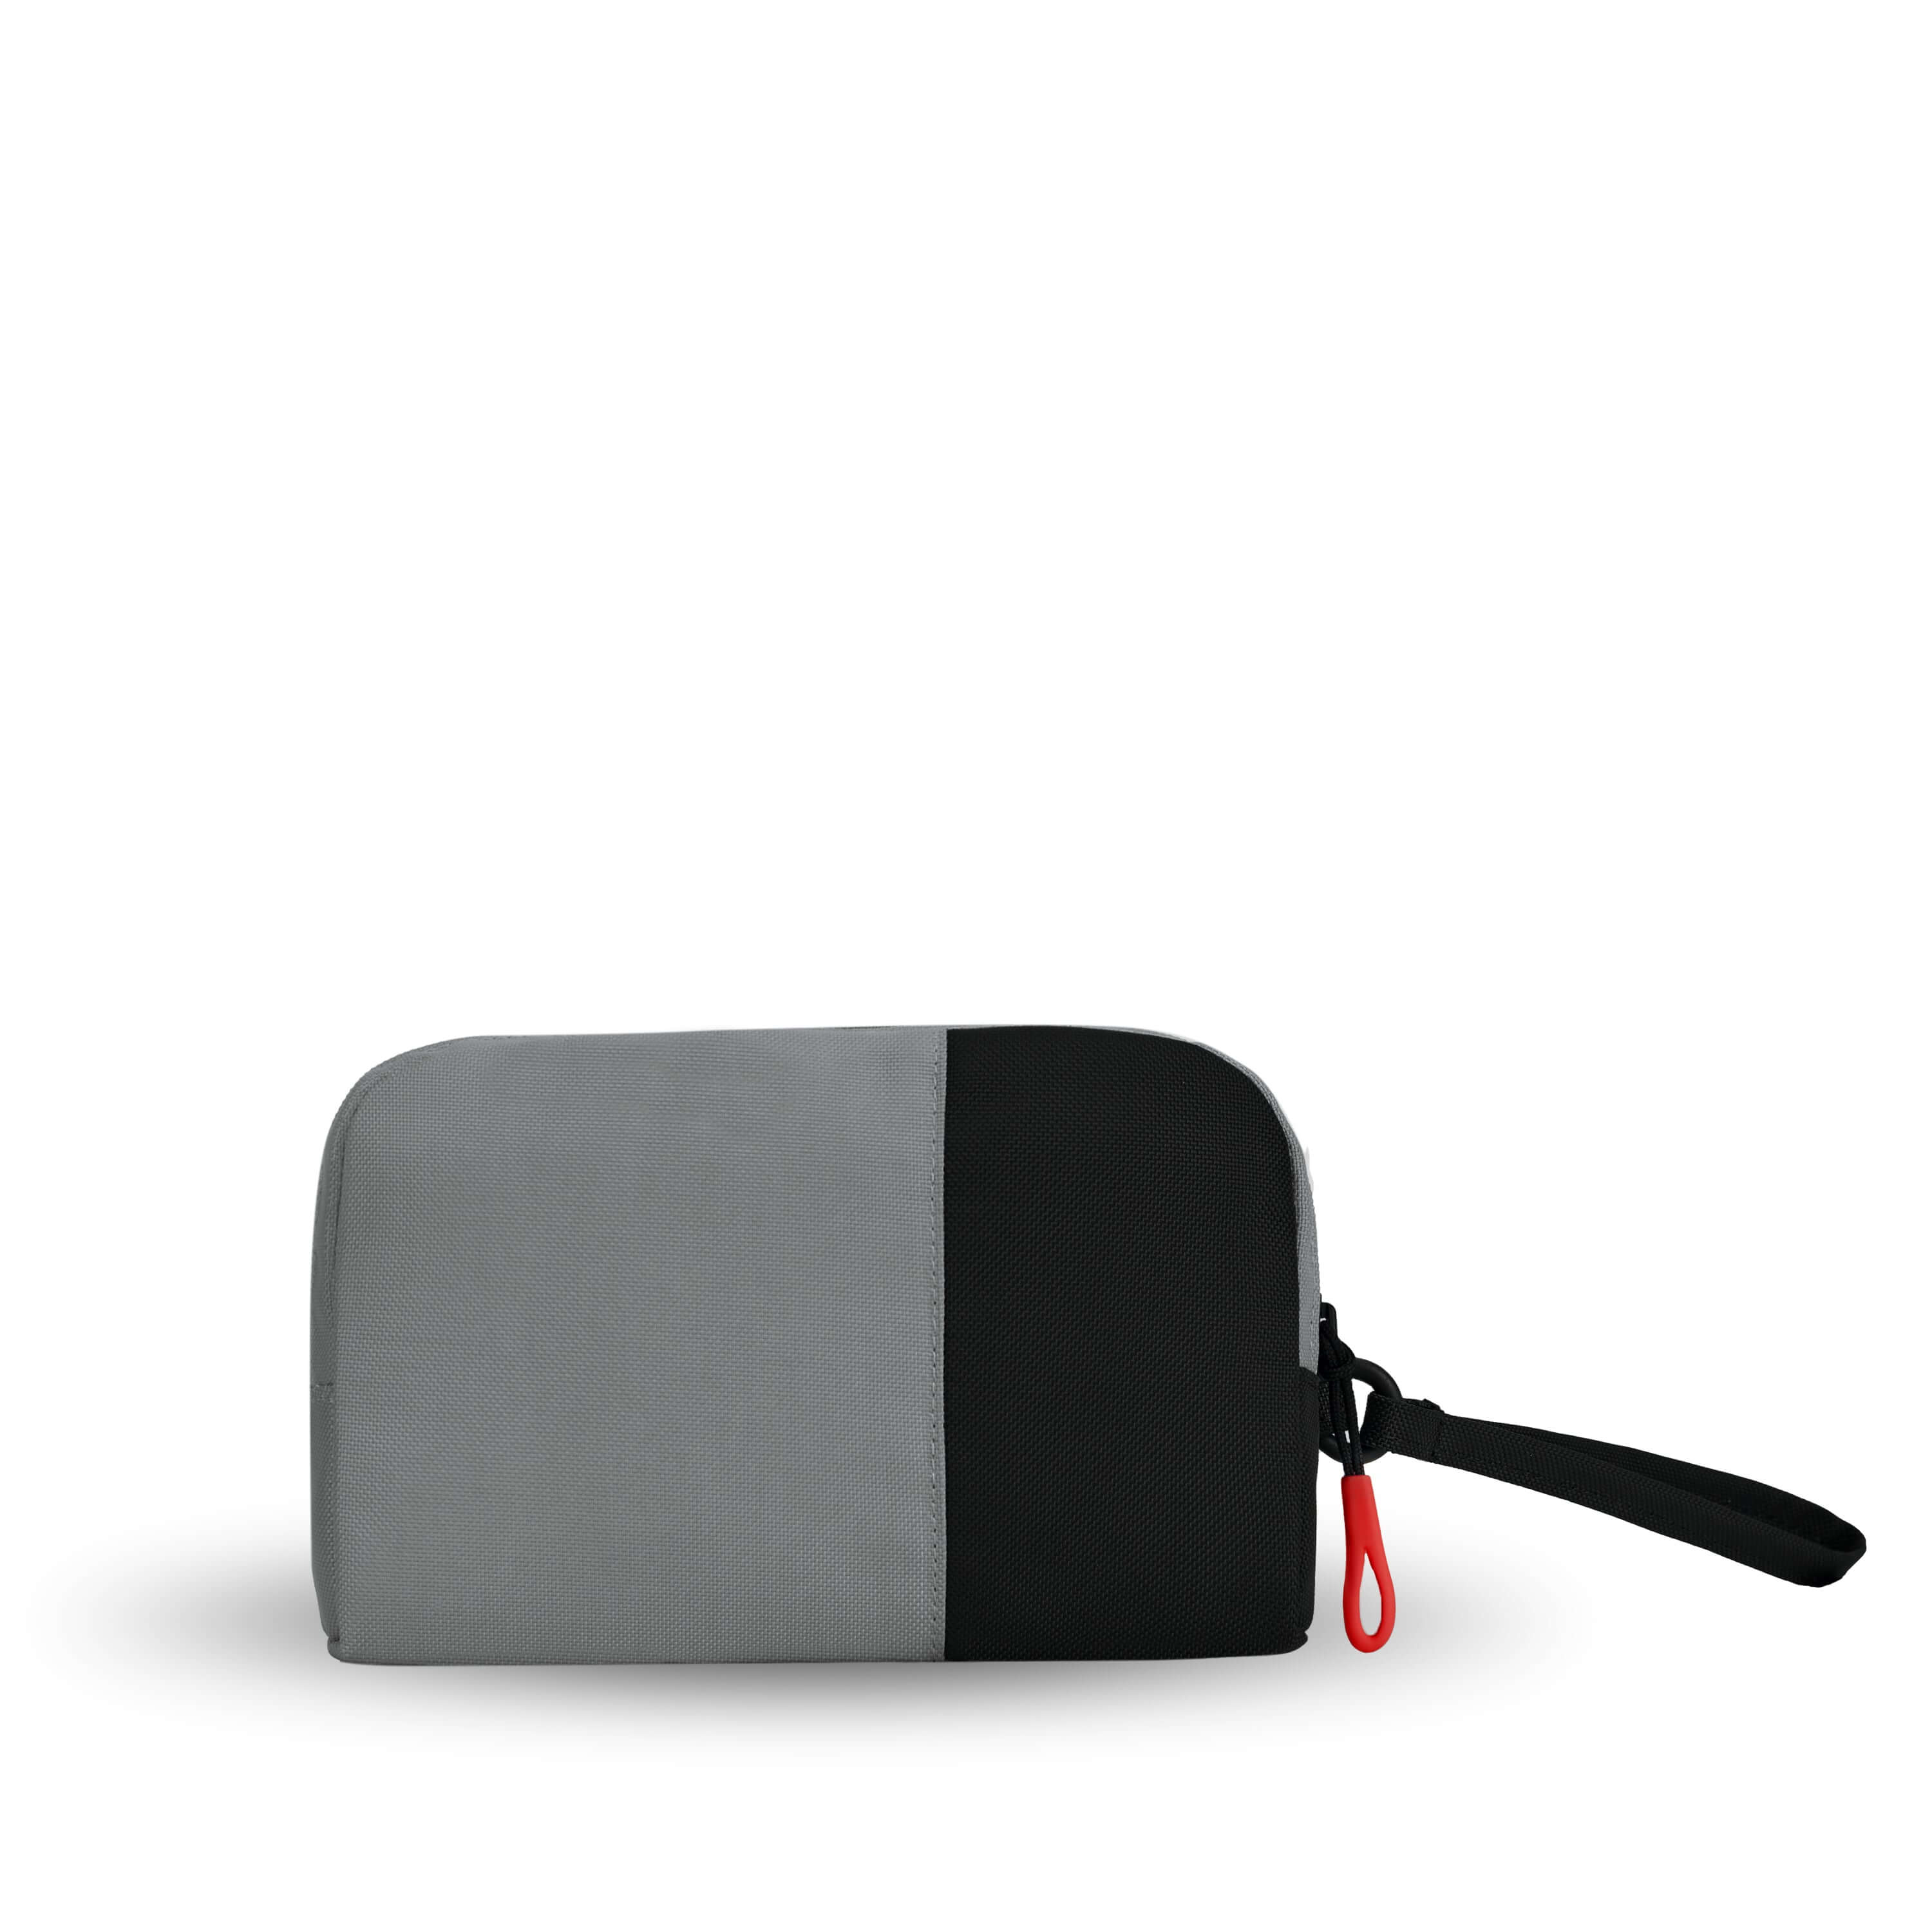 Back view of Sherpani travel accessory, the Jolie in Stone, in small size. The pouch is two-toned in gray and black. It features a black wristlet strap and an easy-pull zipper accented in red.